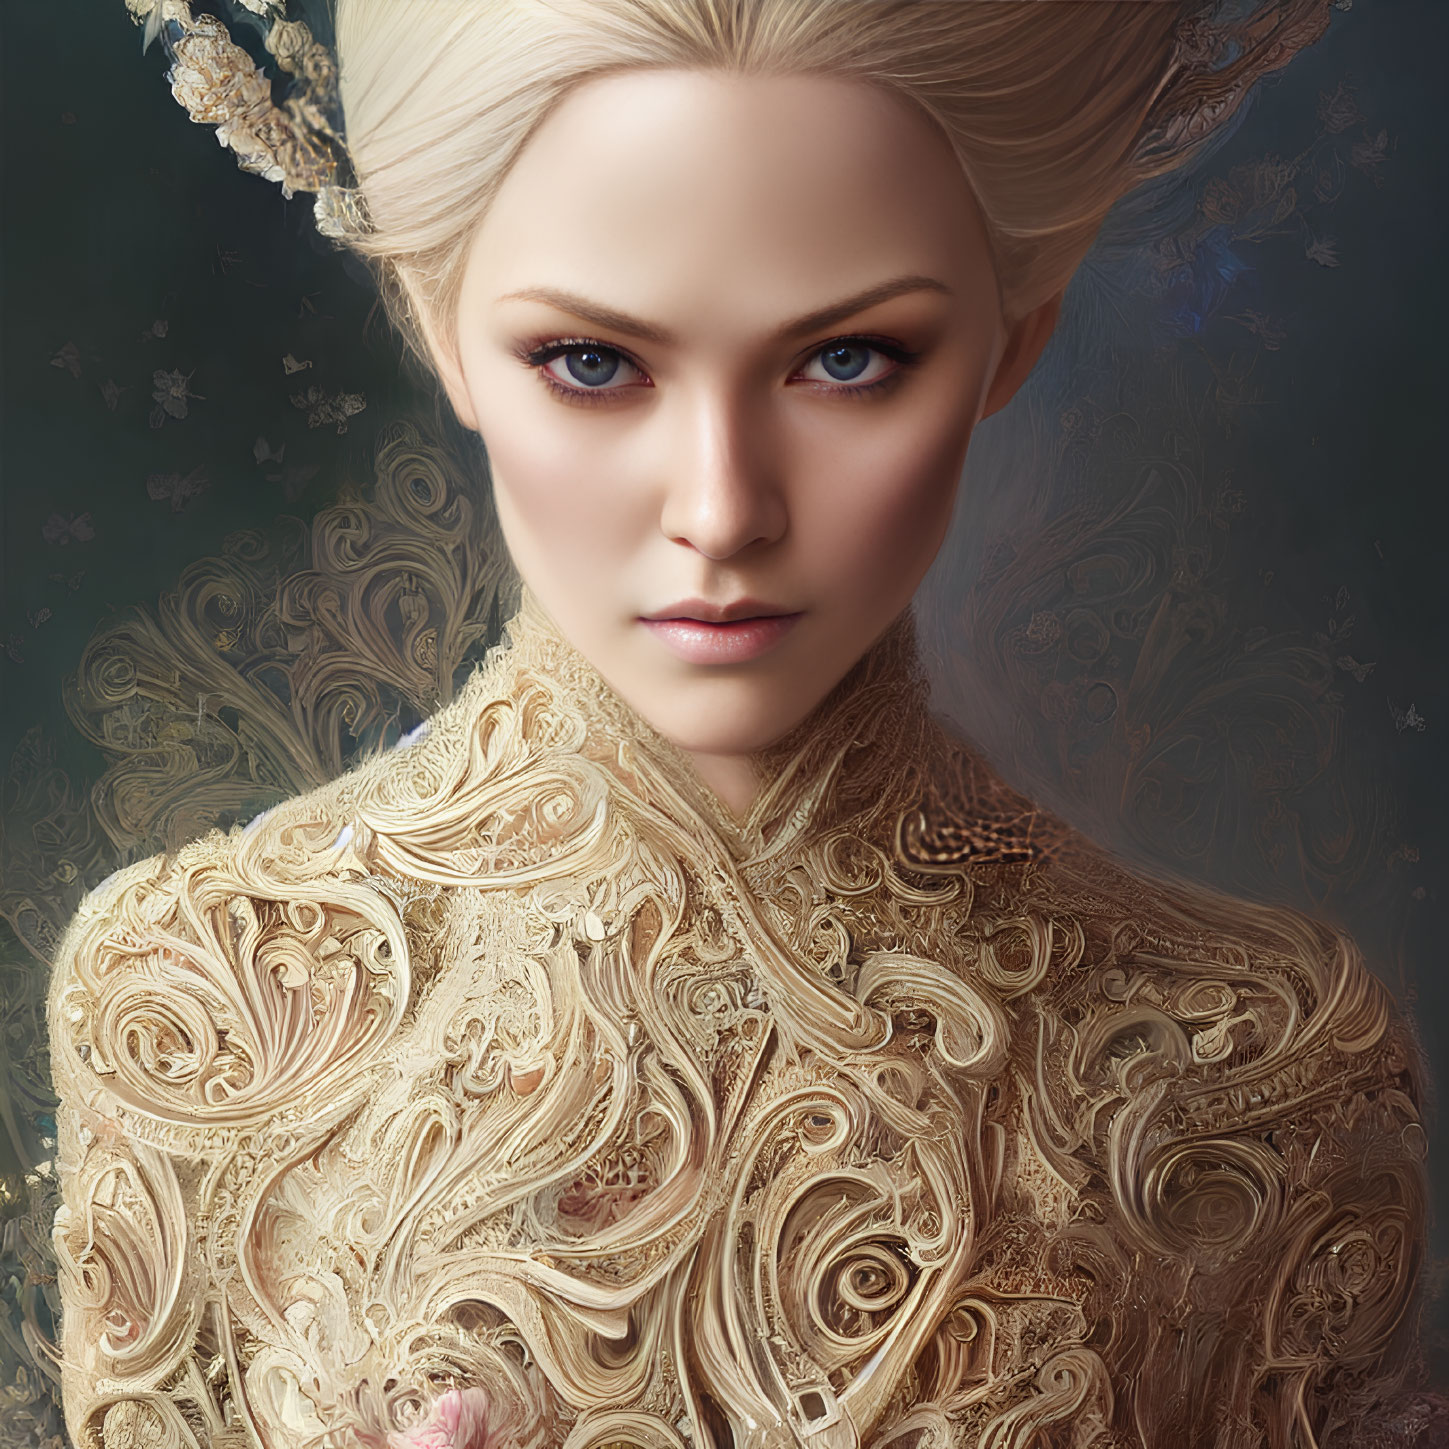 Detailed digital portrait of a woman with blonde hair and blue eyes in ornate gold outfit